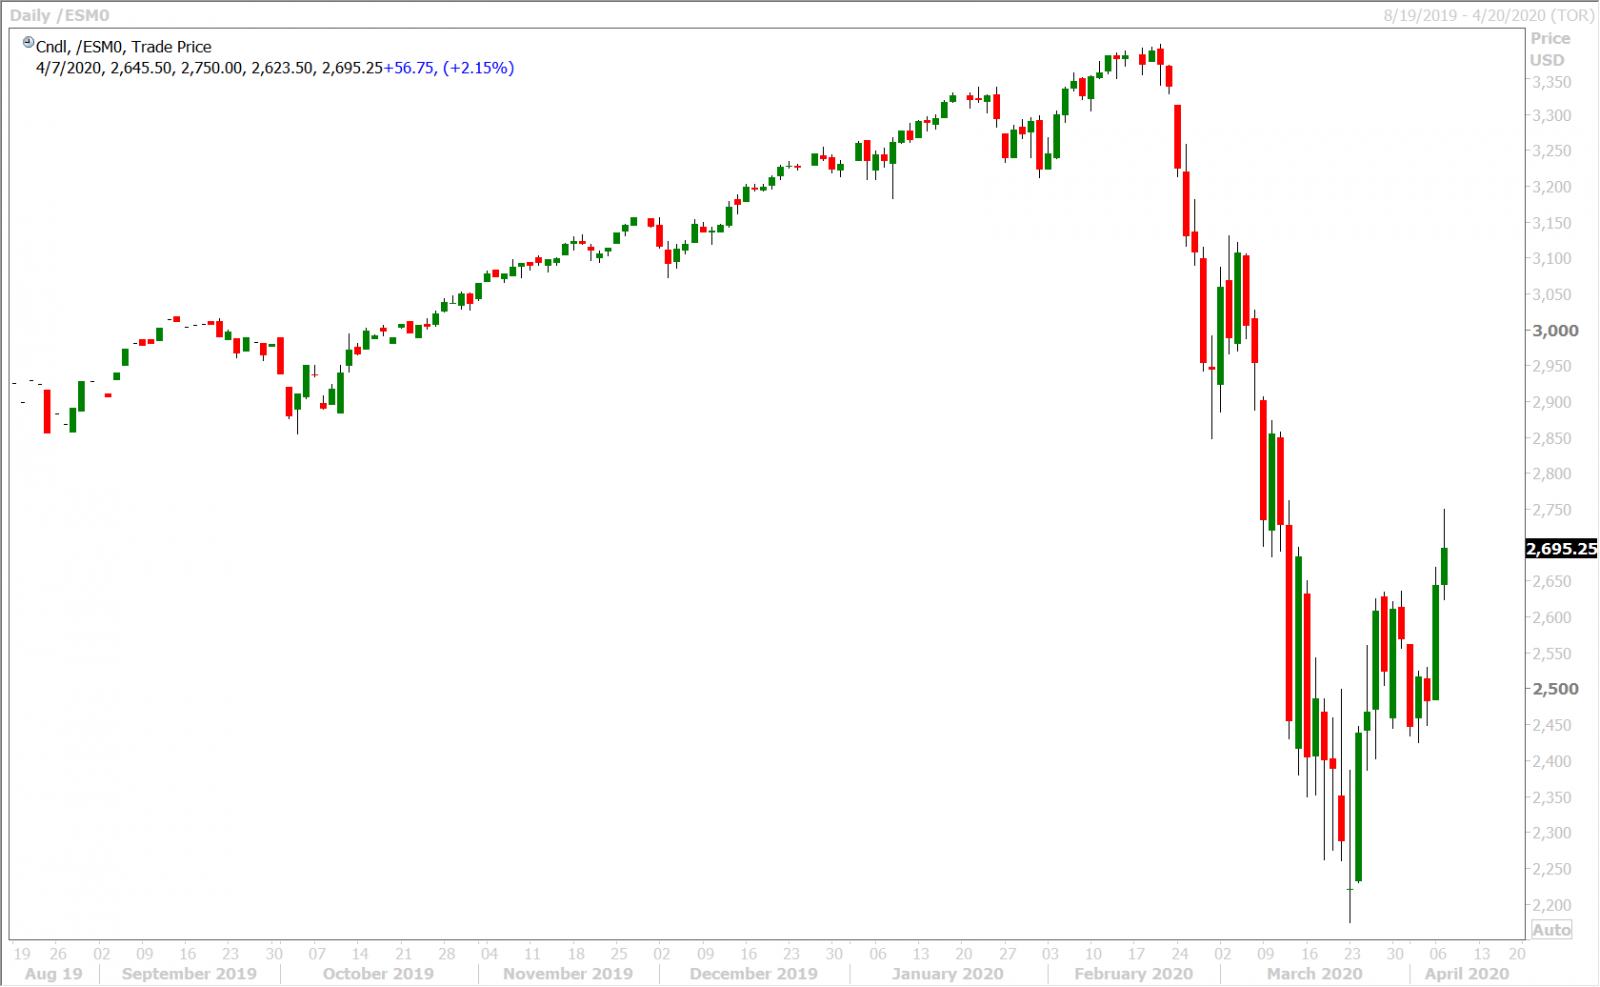 JUNE S&P 500 DAILY